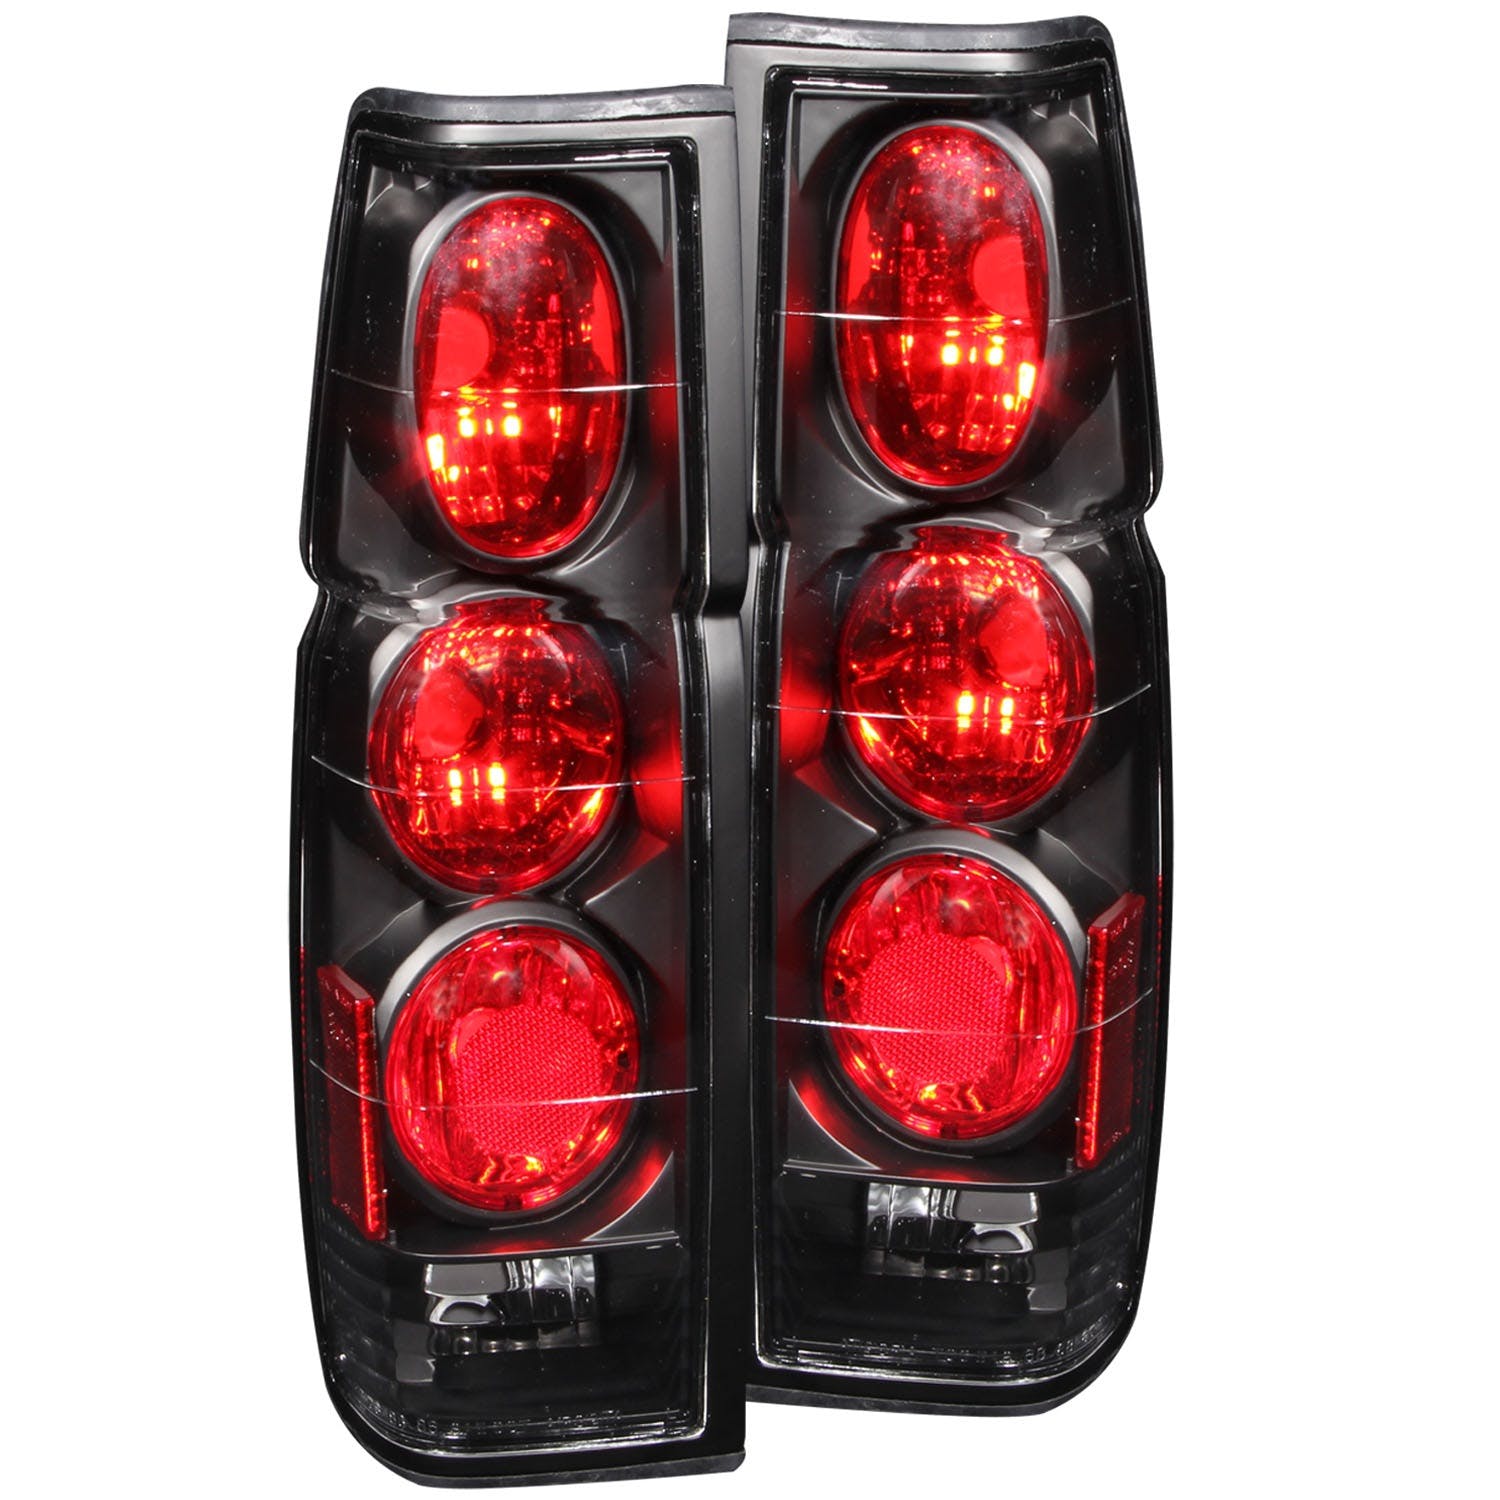 AnzoUSA 211118 Taillights Black